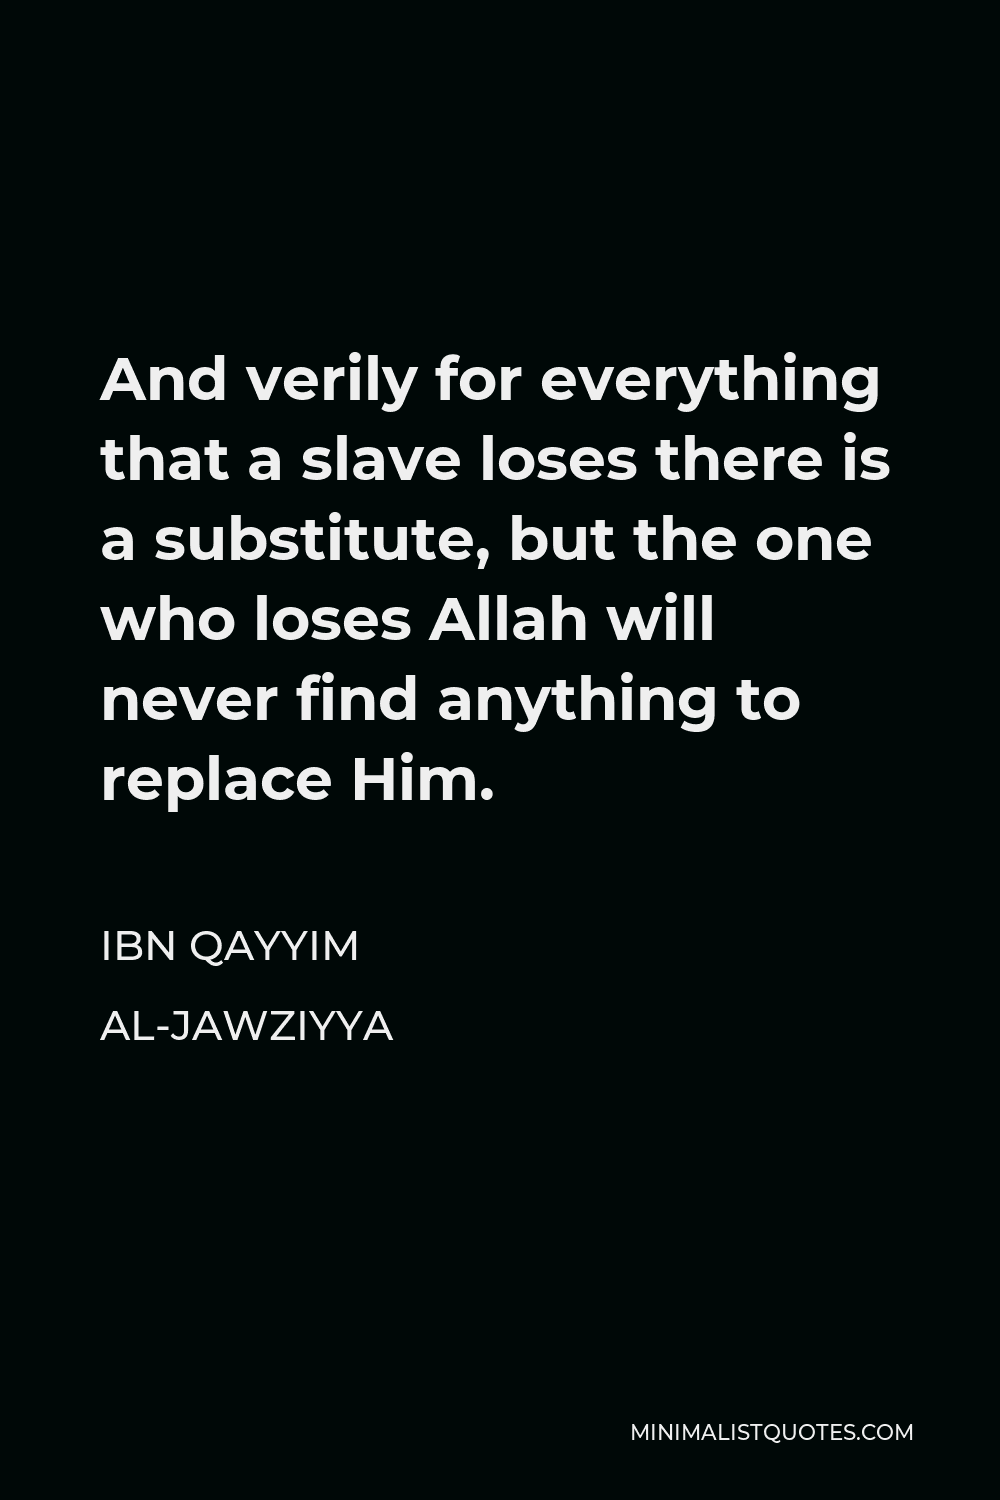 Ibn Qayyim Al-Jawziyya Quote - And verily for everything that a slave loses there is a substitute, but the one who loses Allah will never find anything to replace Him.